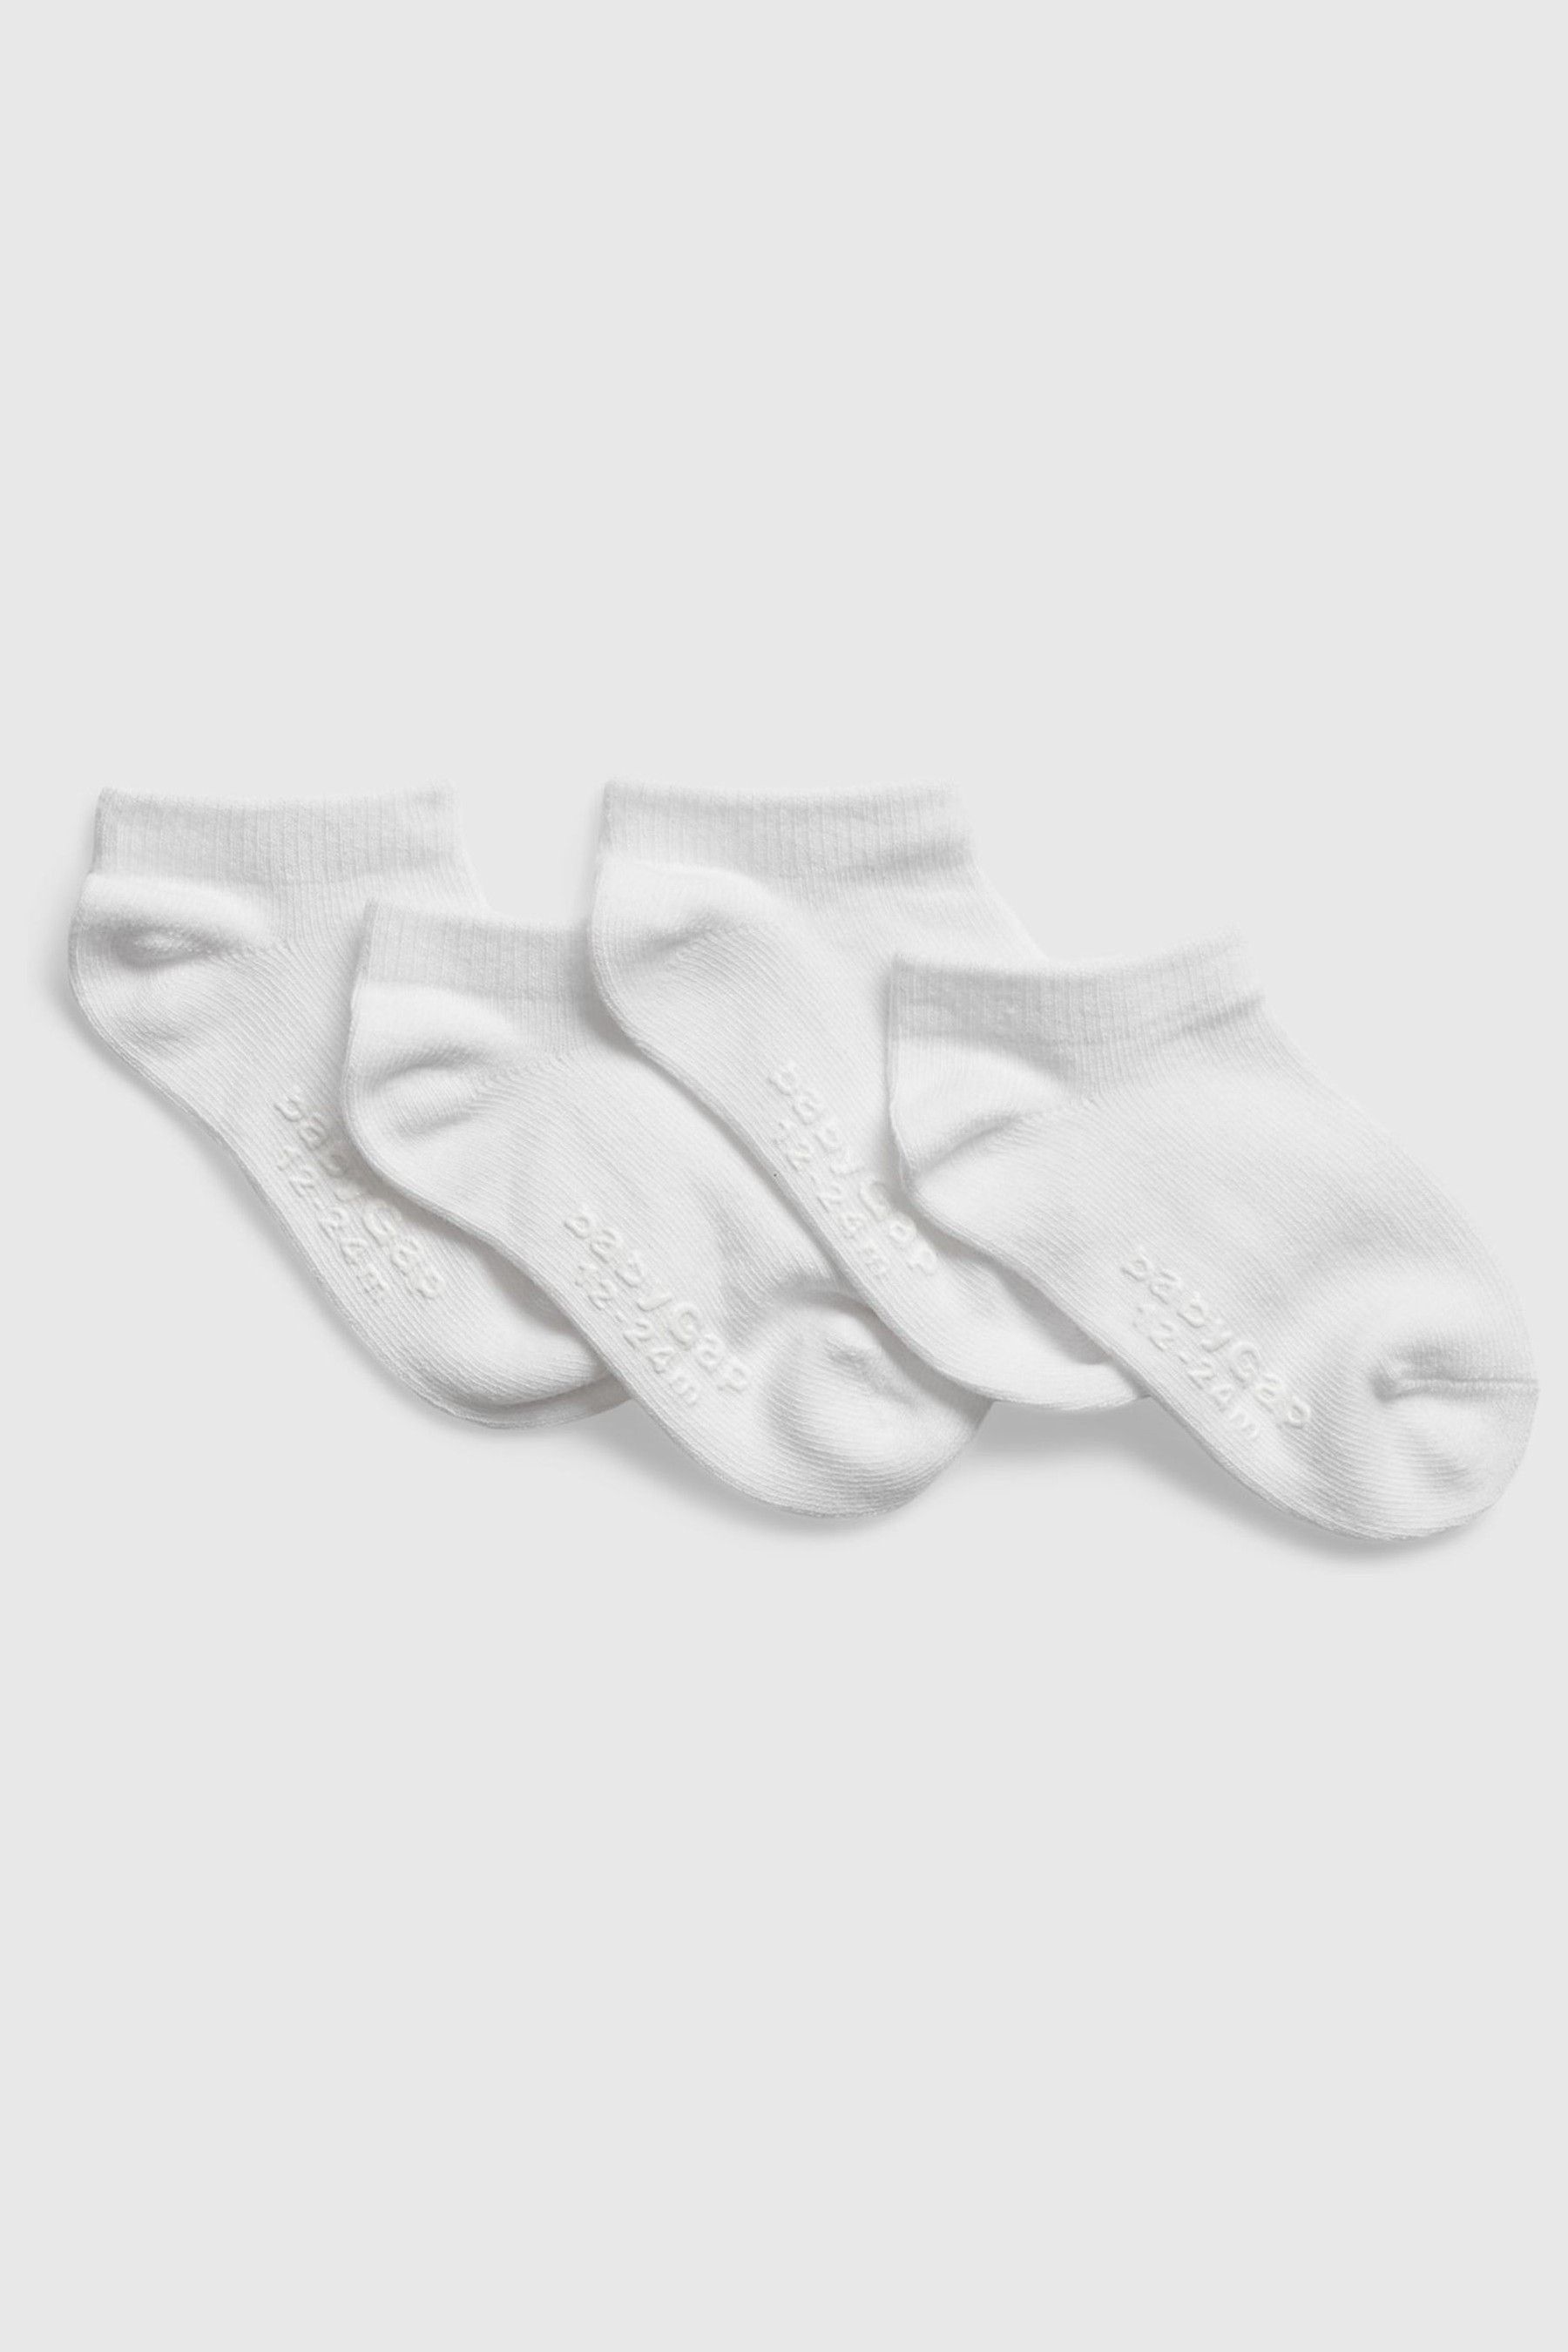 Buy Gap Toddler No Show Socks (4-Pack) from the Gap online shop